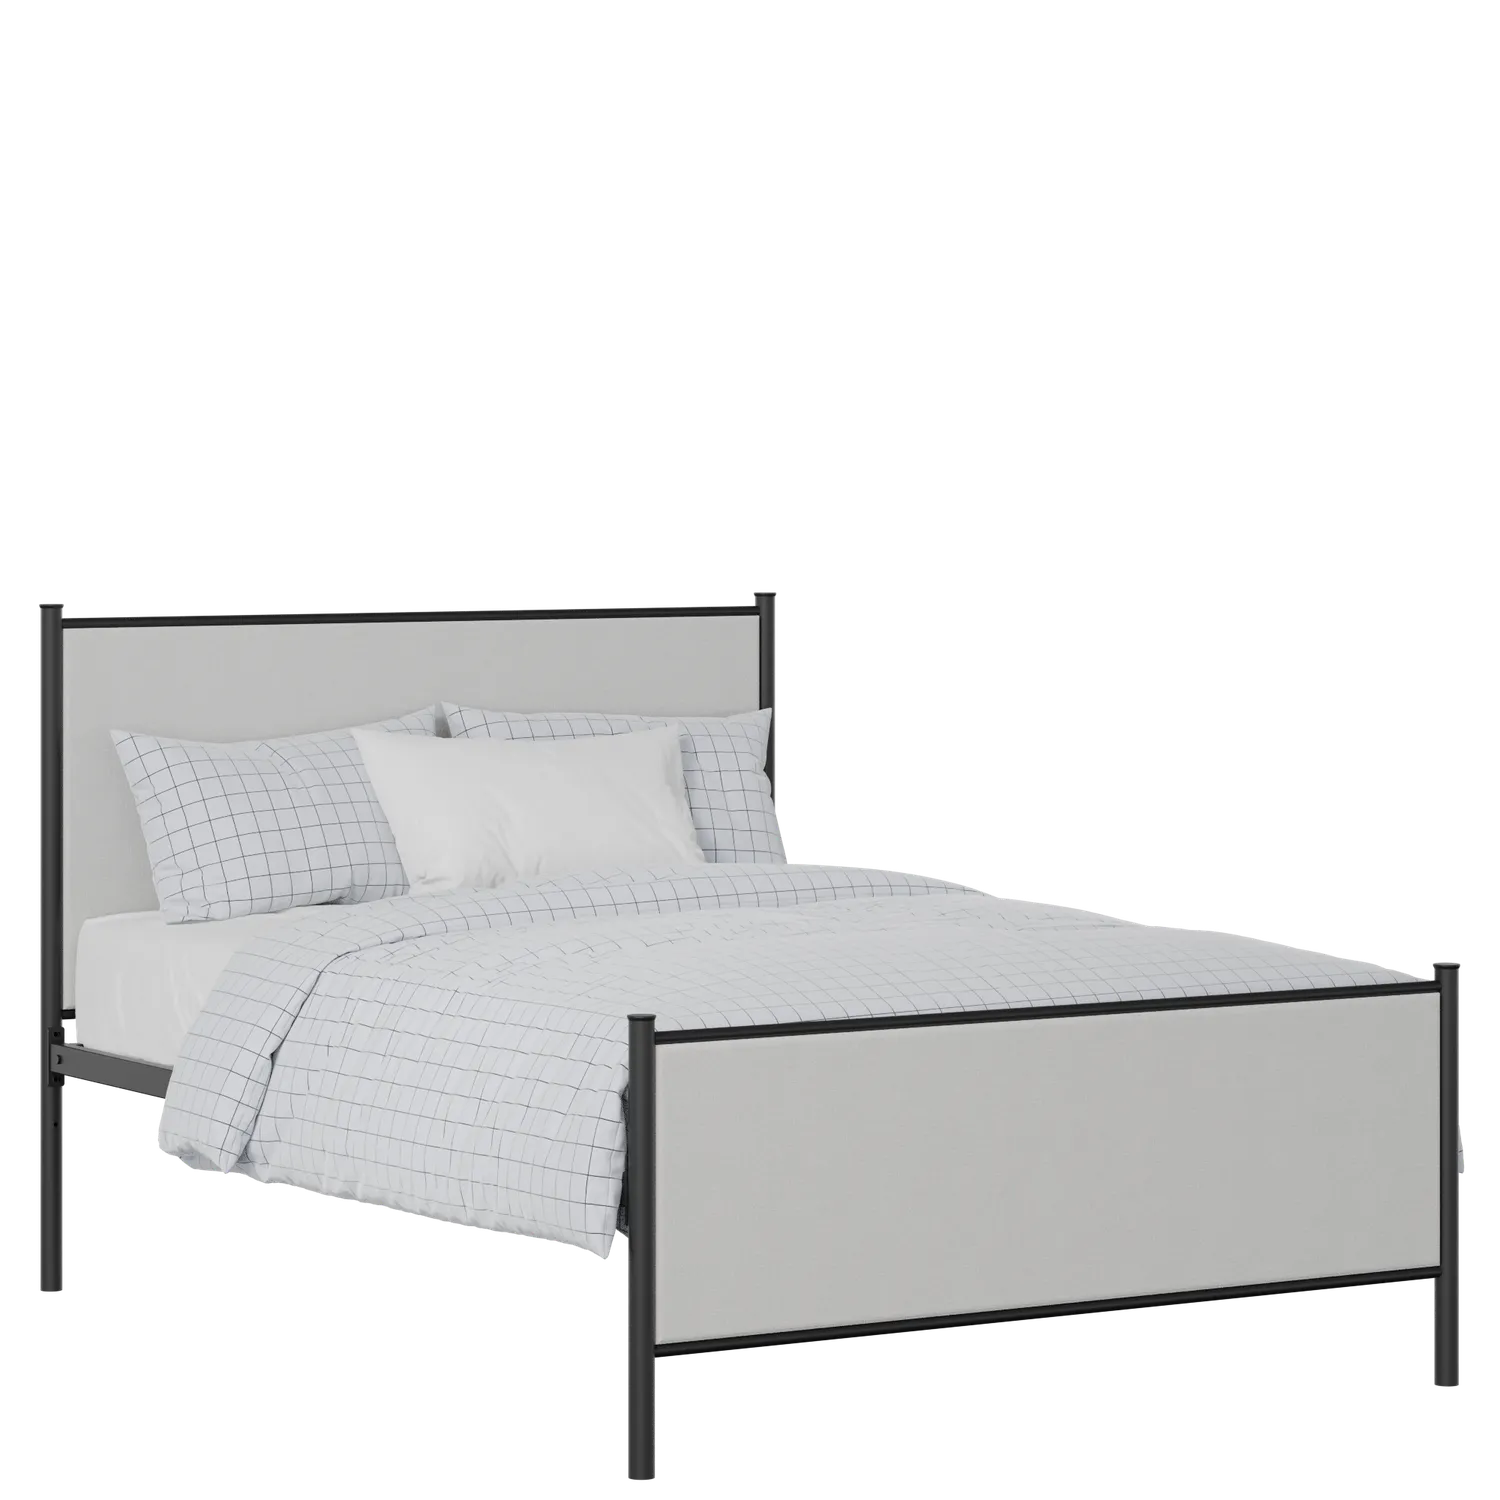 Brest iron/metal upholstered bed in black with silver fabric